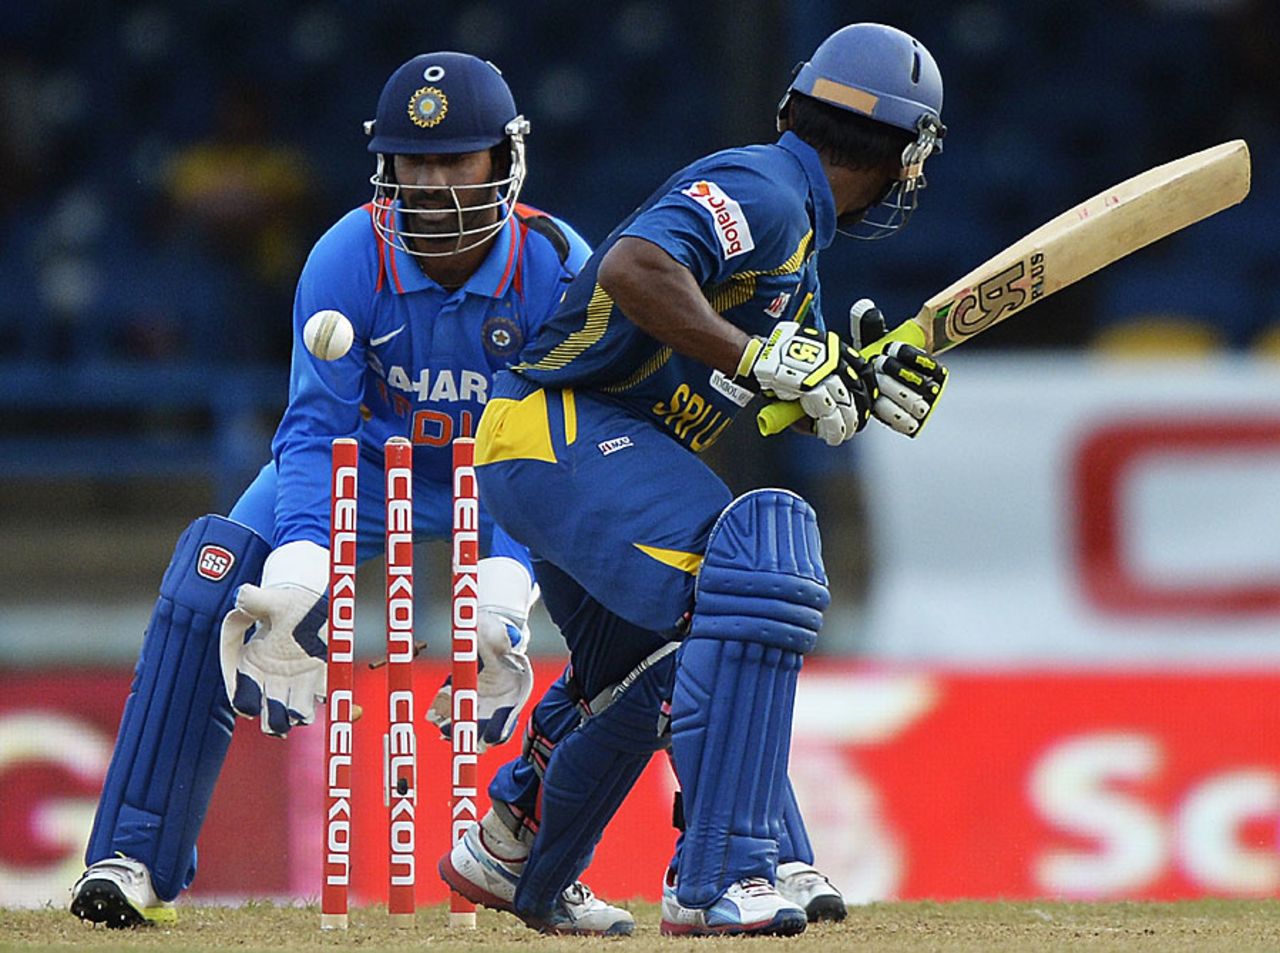 Jeevan Mendis fails to dig out a yorker from R Ashwin, India v Sri Lanka, West Indies tri-series, Port-of-Spain, July 9, 2013